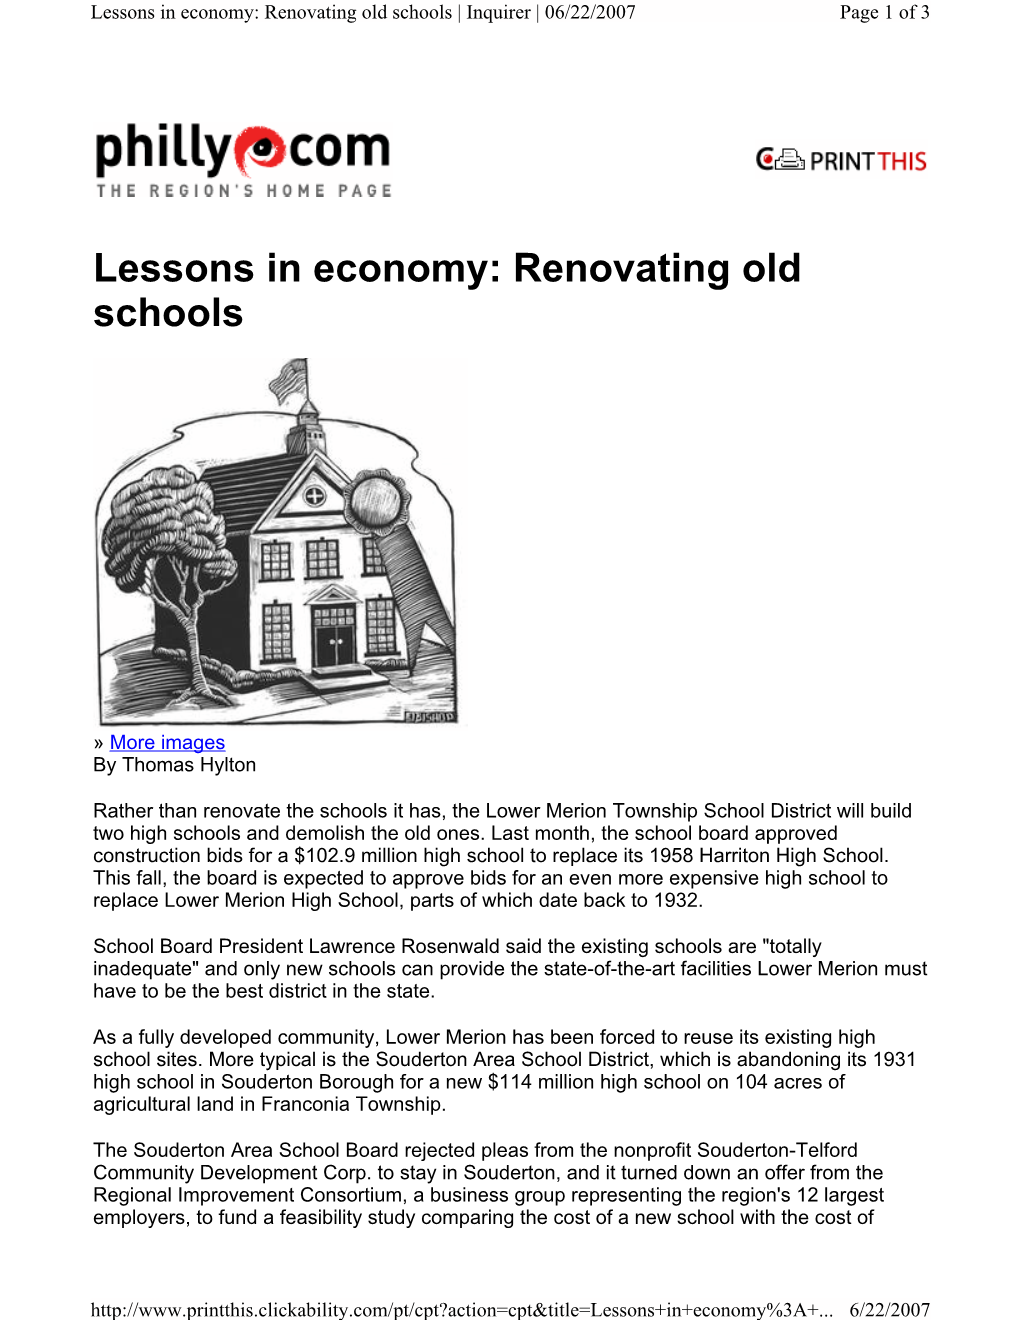 Lessons in Economy: Renovating Old Schools | Inquirer | 06/22/2007 Page 1 of 3